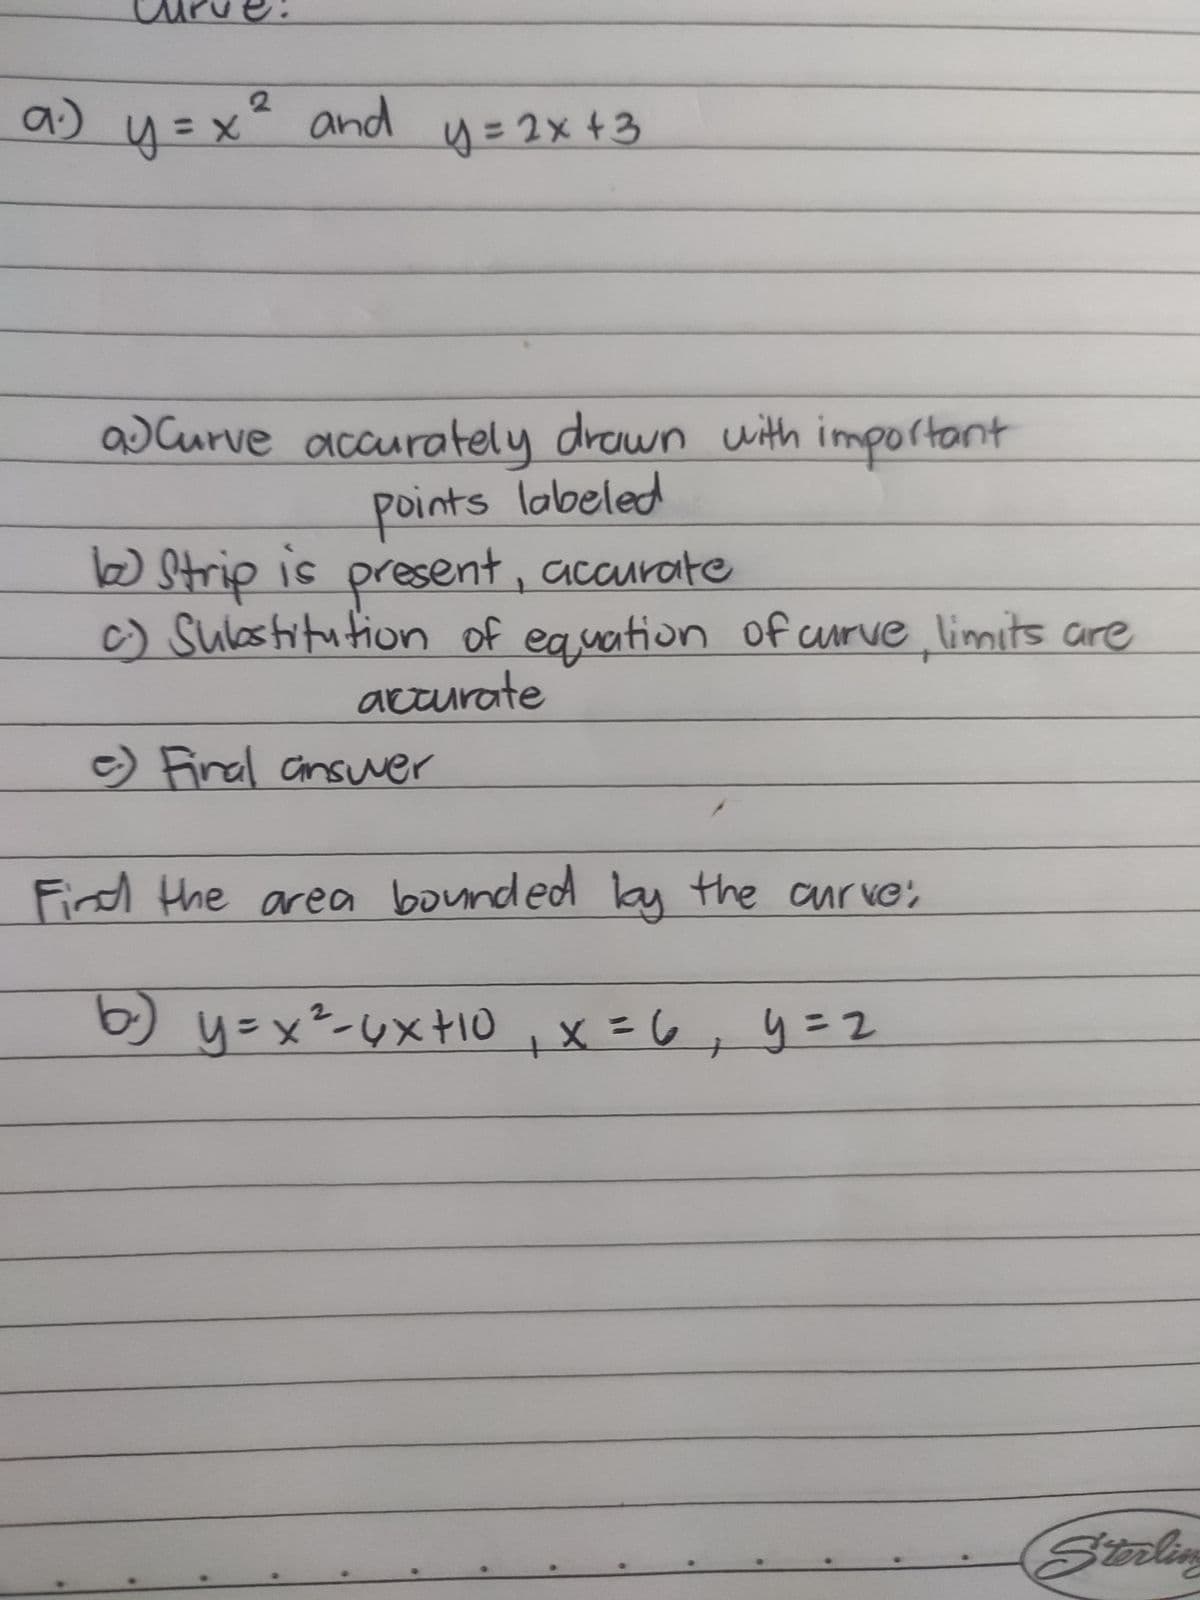 a) y=x² and
y=2x+3
aJCurve accurately drewn with important
points lobeled
present, accurate
c) Sulbstitution of eg vation of curve limits are
W Strip is
accurate
e) Final ainsuer
Find the area ',
bounded lay the aurve
6 uニxーレx10 ,x=6,4ニ2
Stealin
